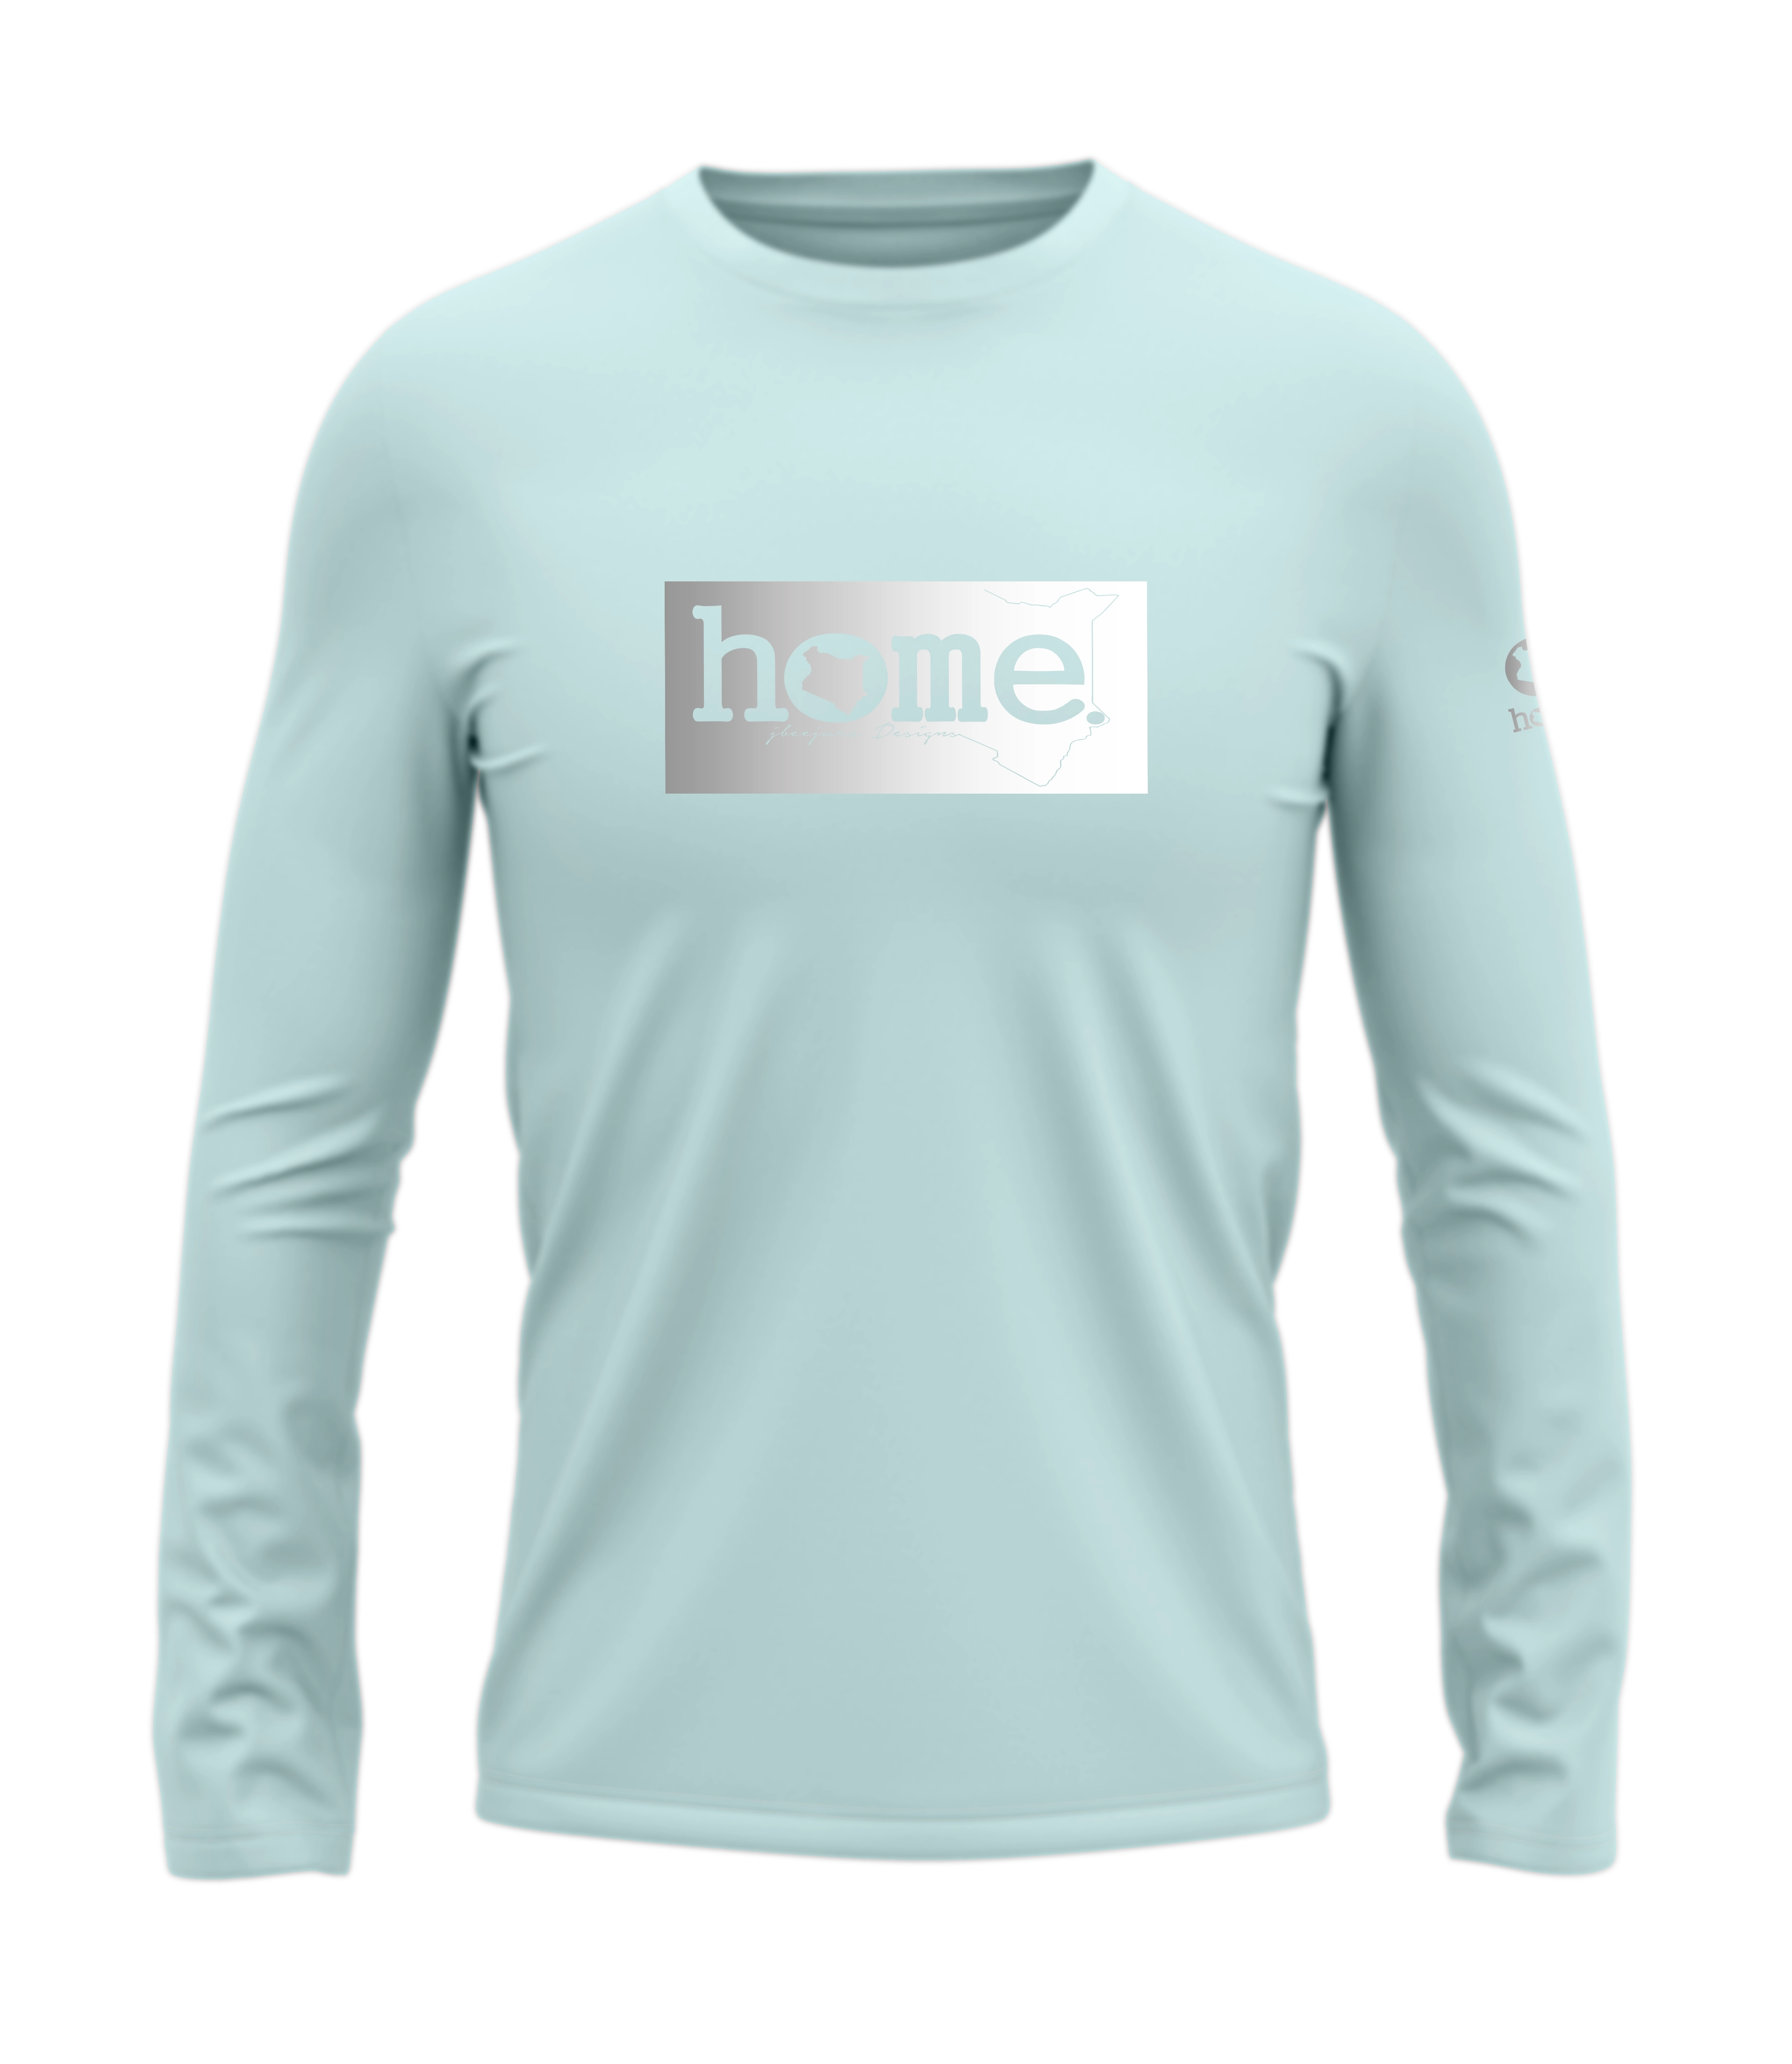 home_254 LONG-SLEEVED MISTY BLUE T-SHIRT WITH A SILVER CLASSIC PRINT – COTTON PLUS FABRIC